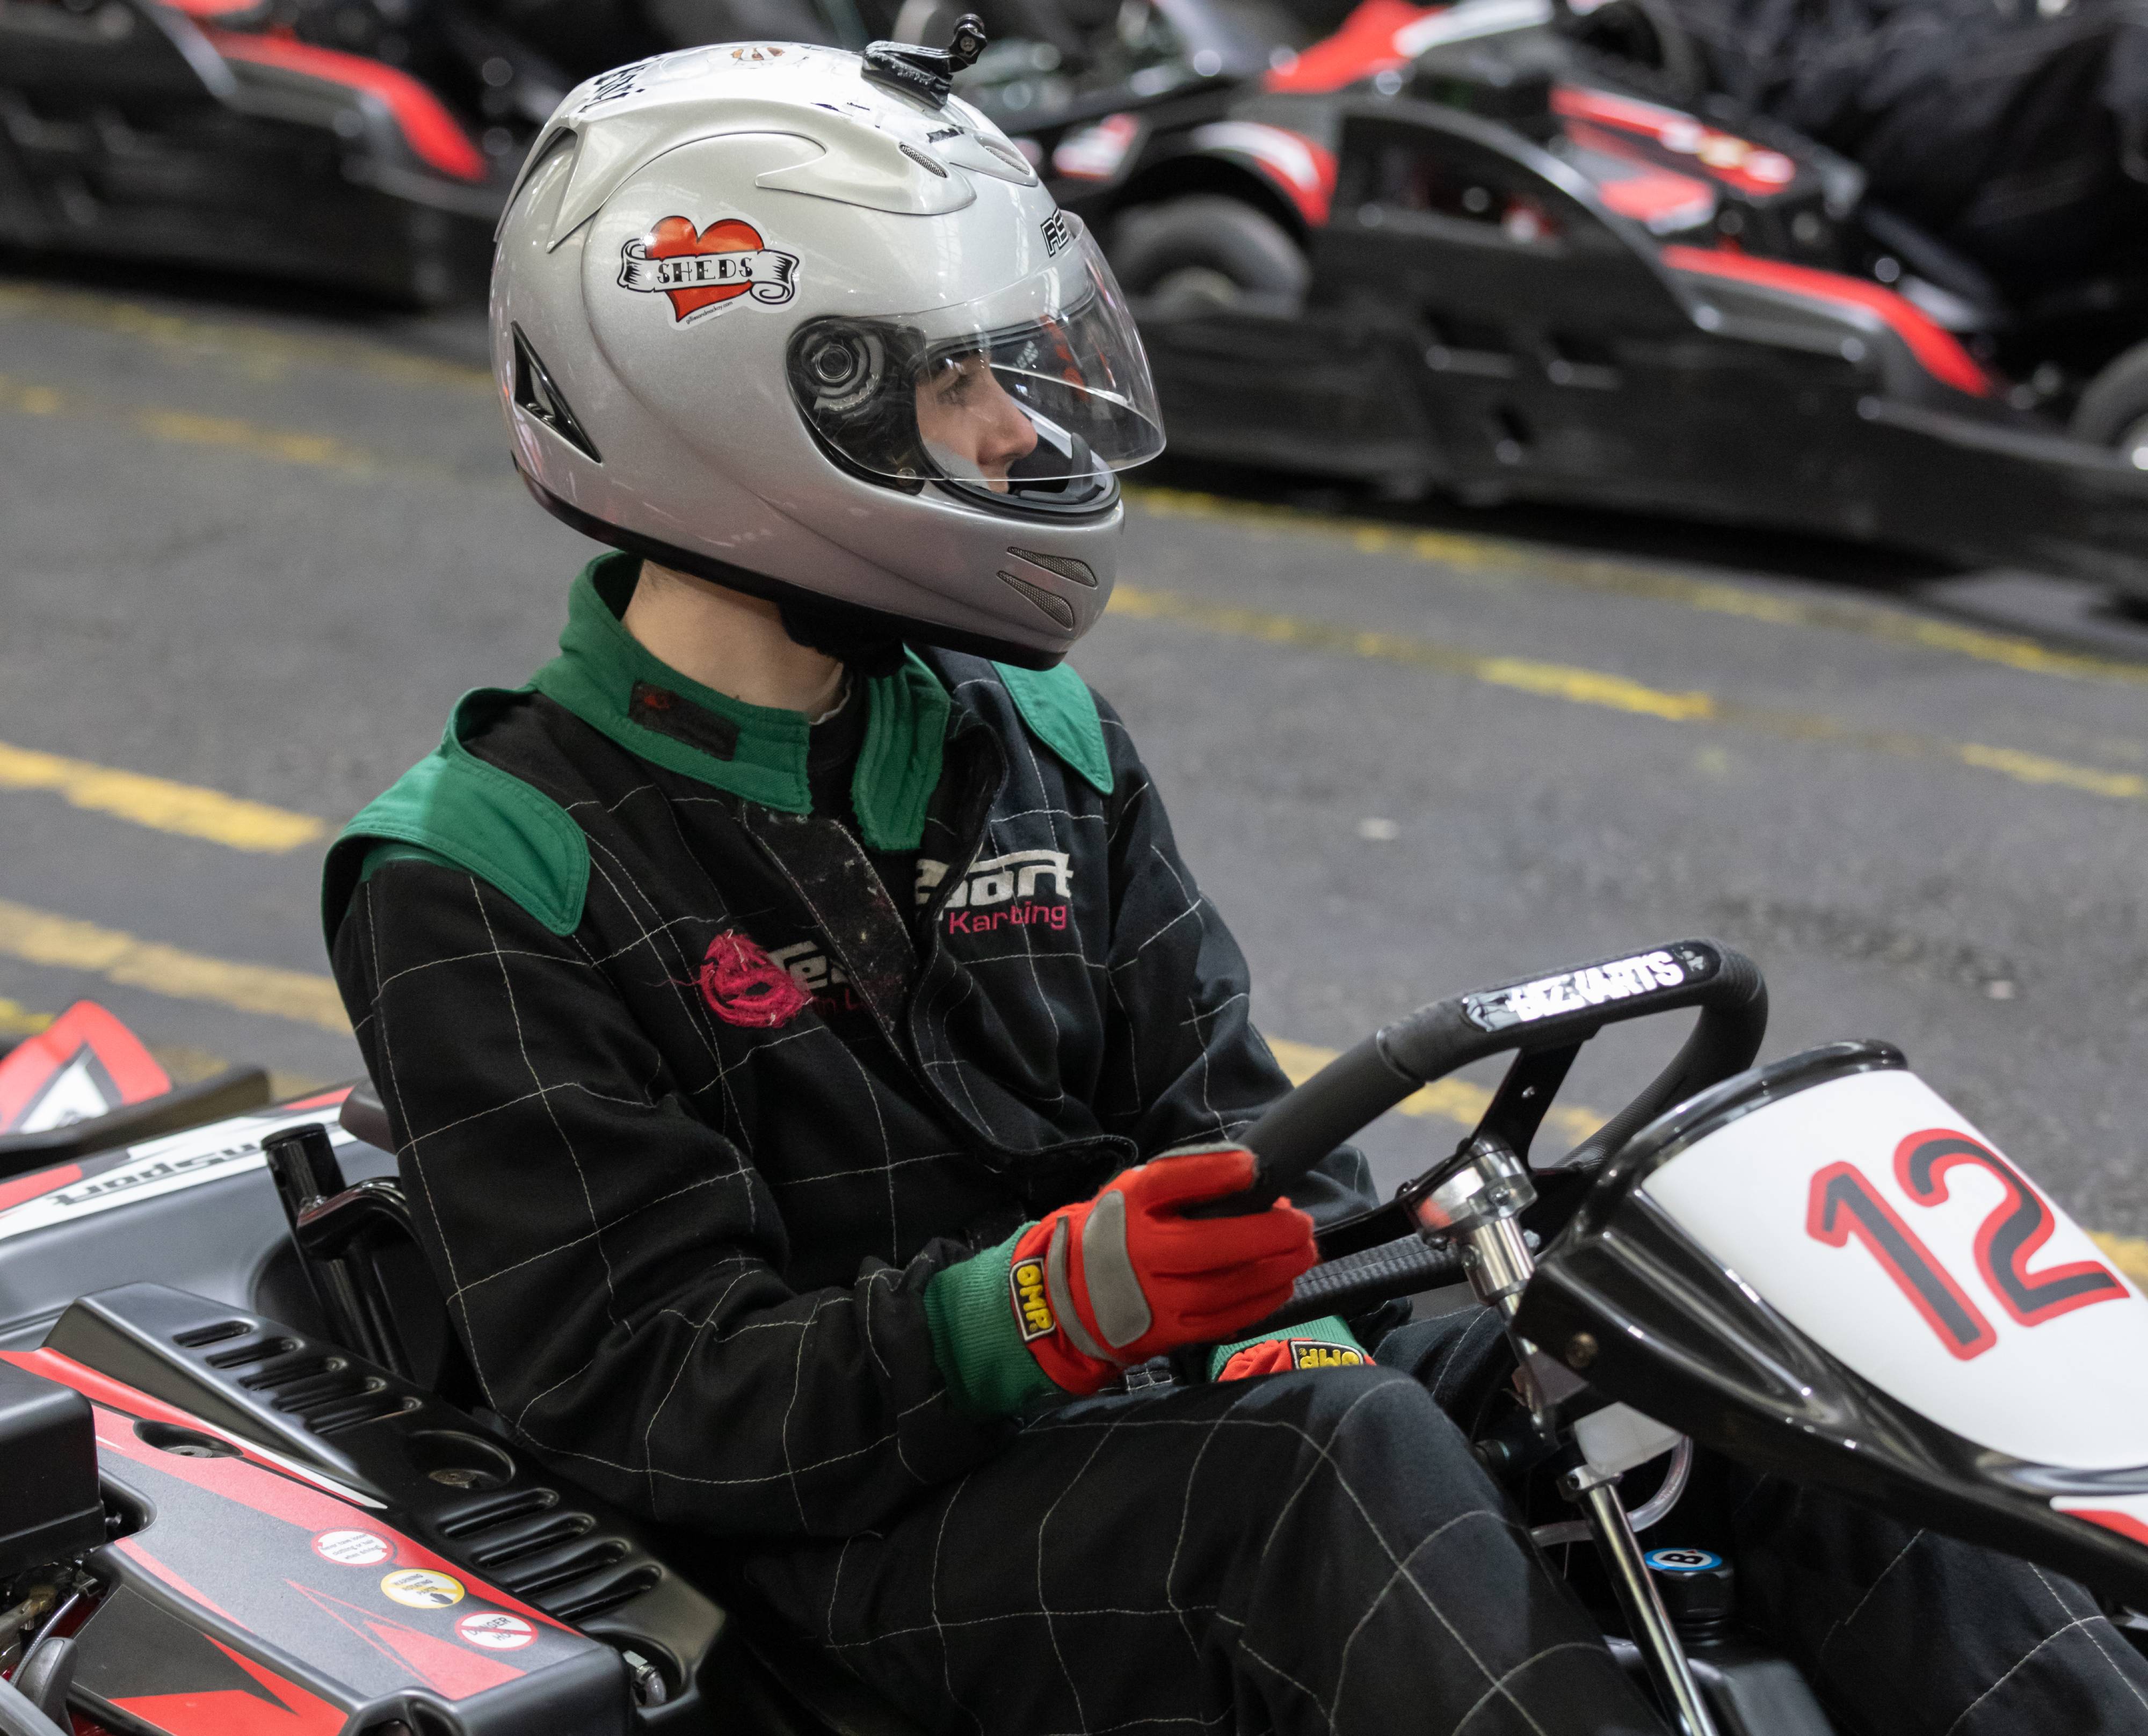 Cameron Sale placed in the top five of the nation's biggest indoor karting competition